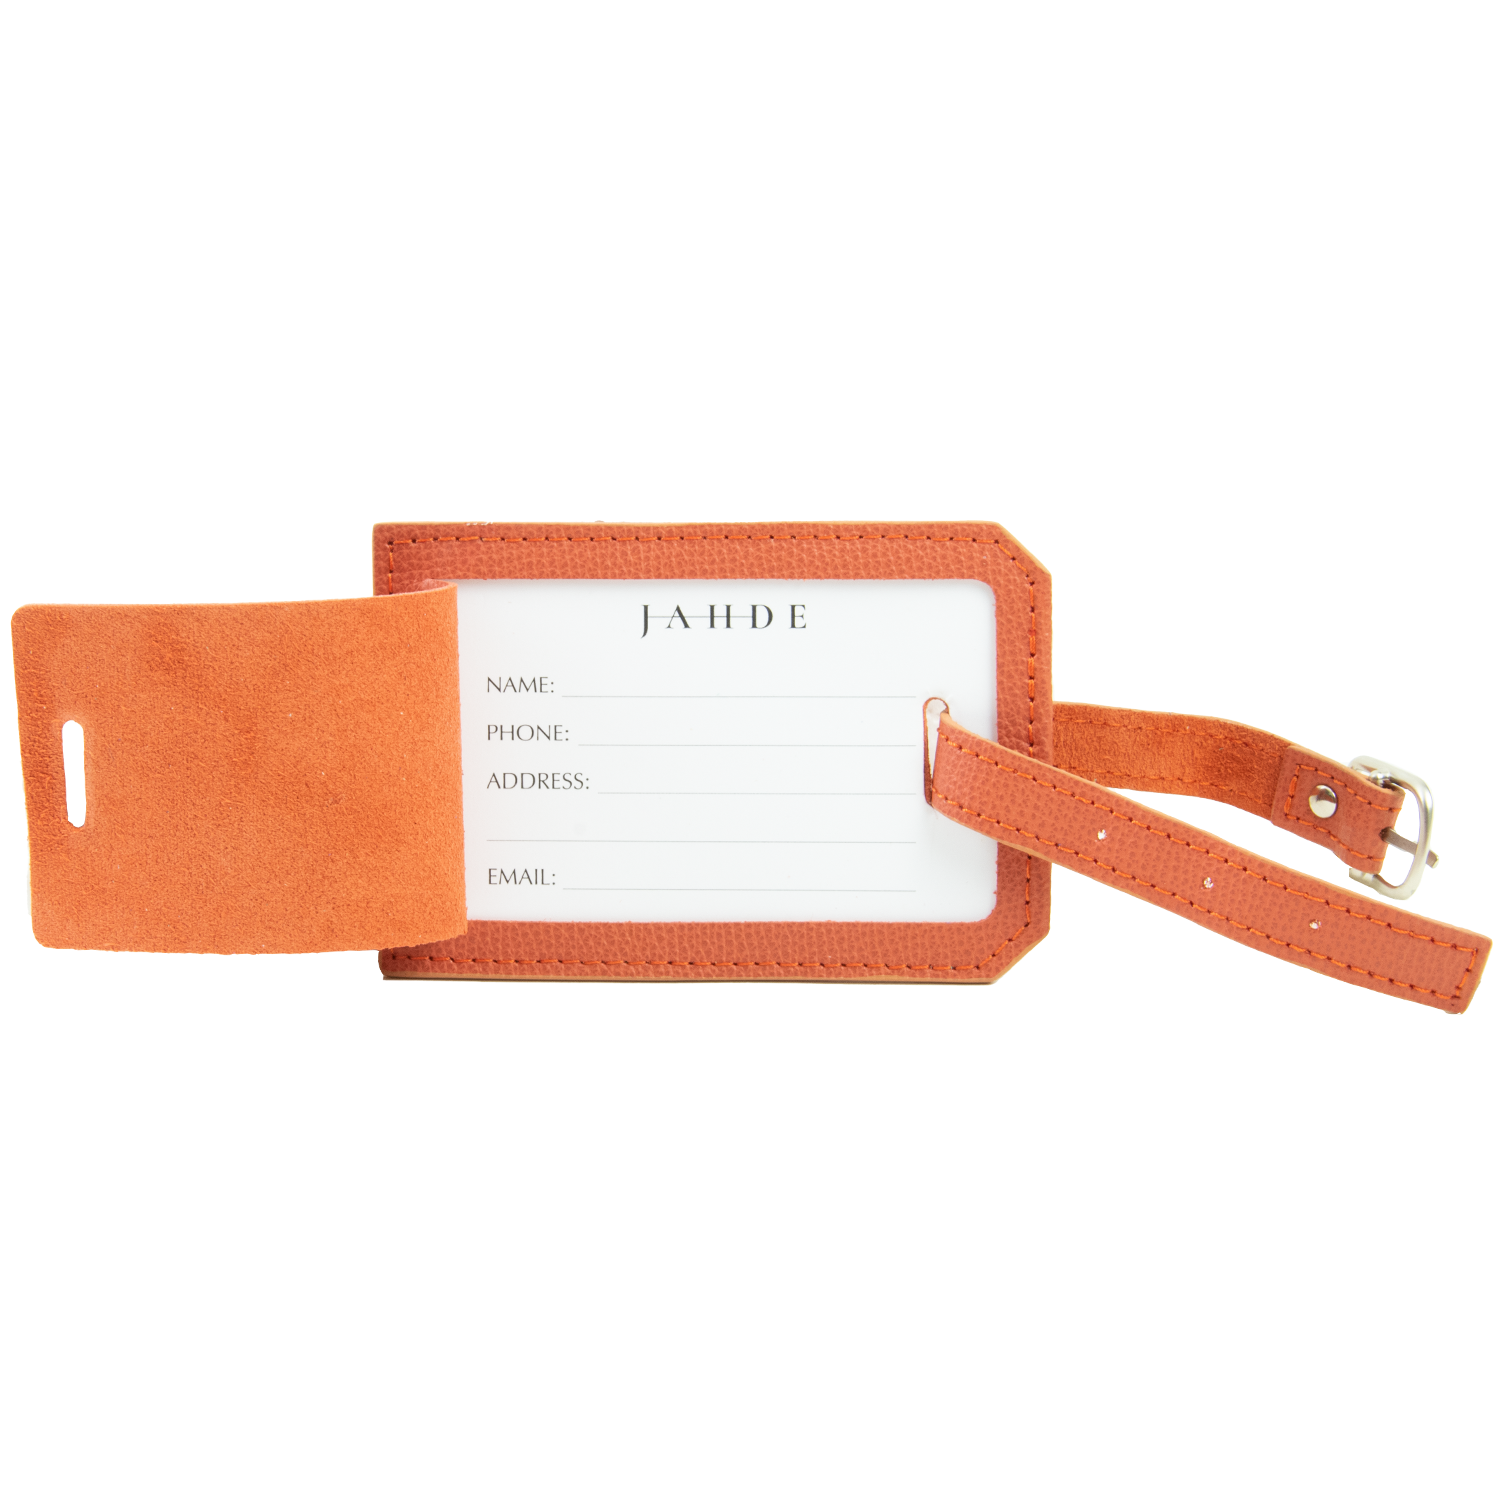 Jahde Leather Liberty Luggage Tag